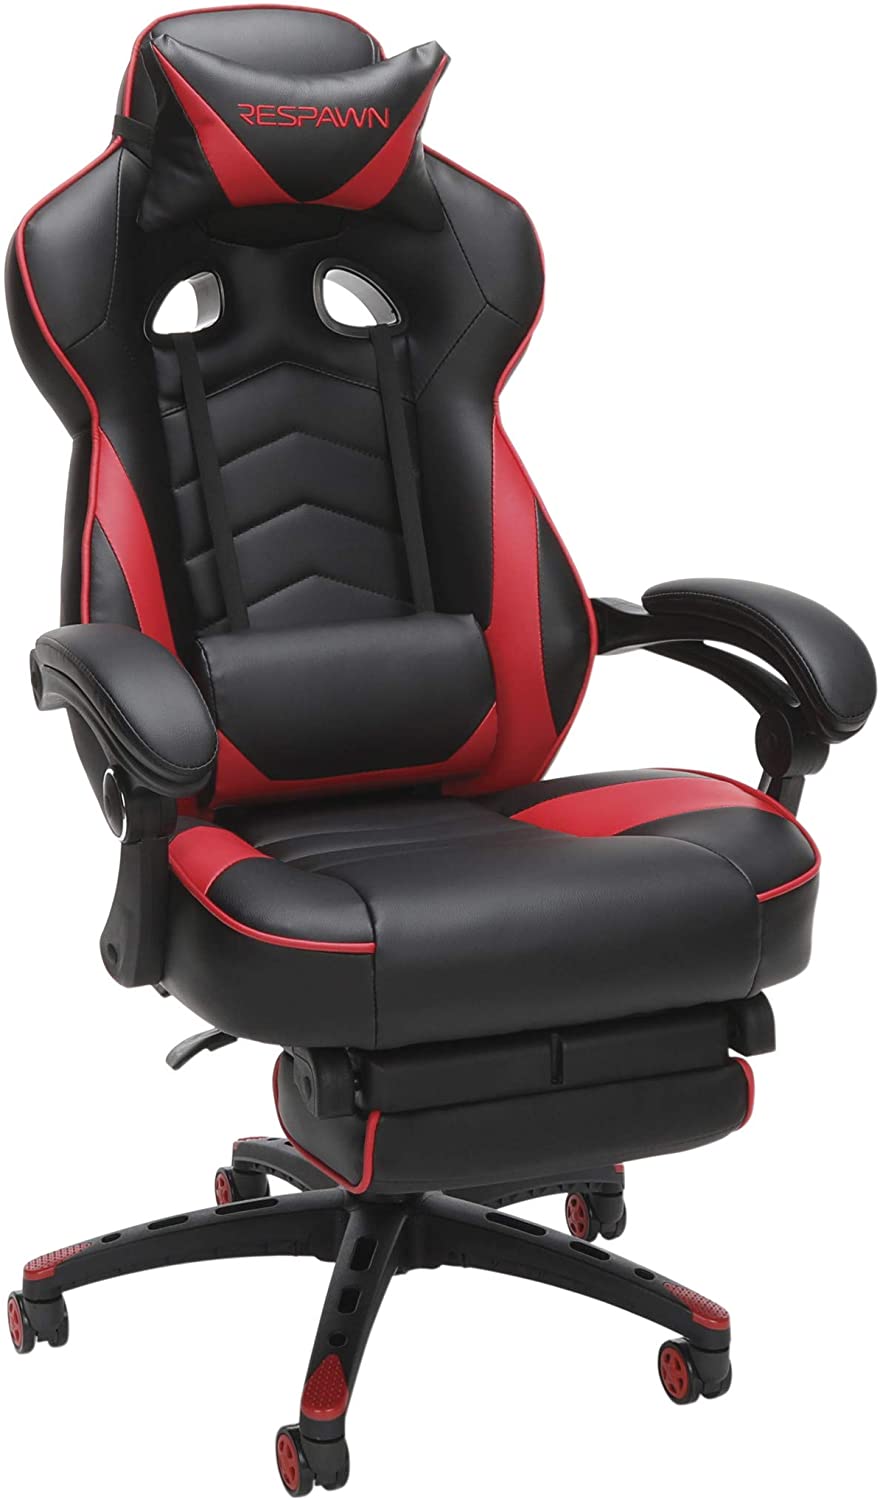 RESPAWN RSP-110 Racing Style Ergonomic Leather Gaming Chair